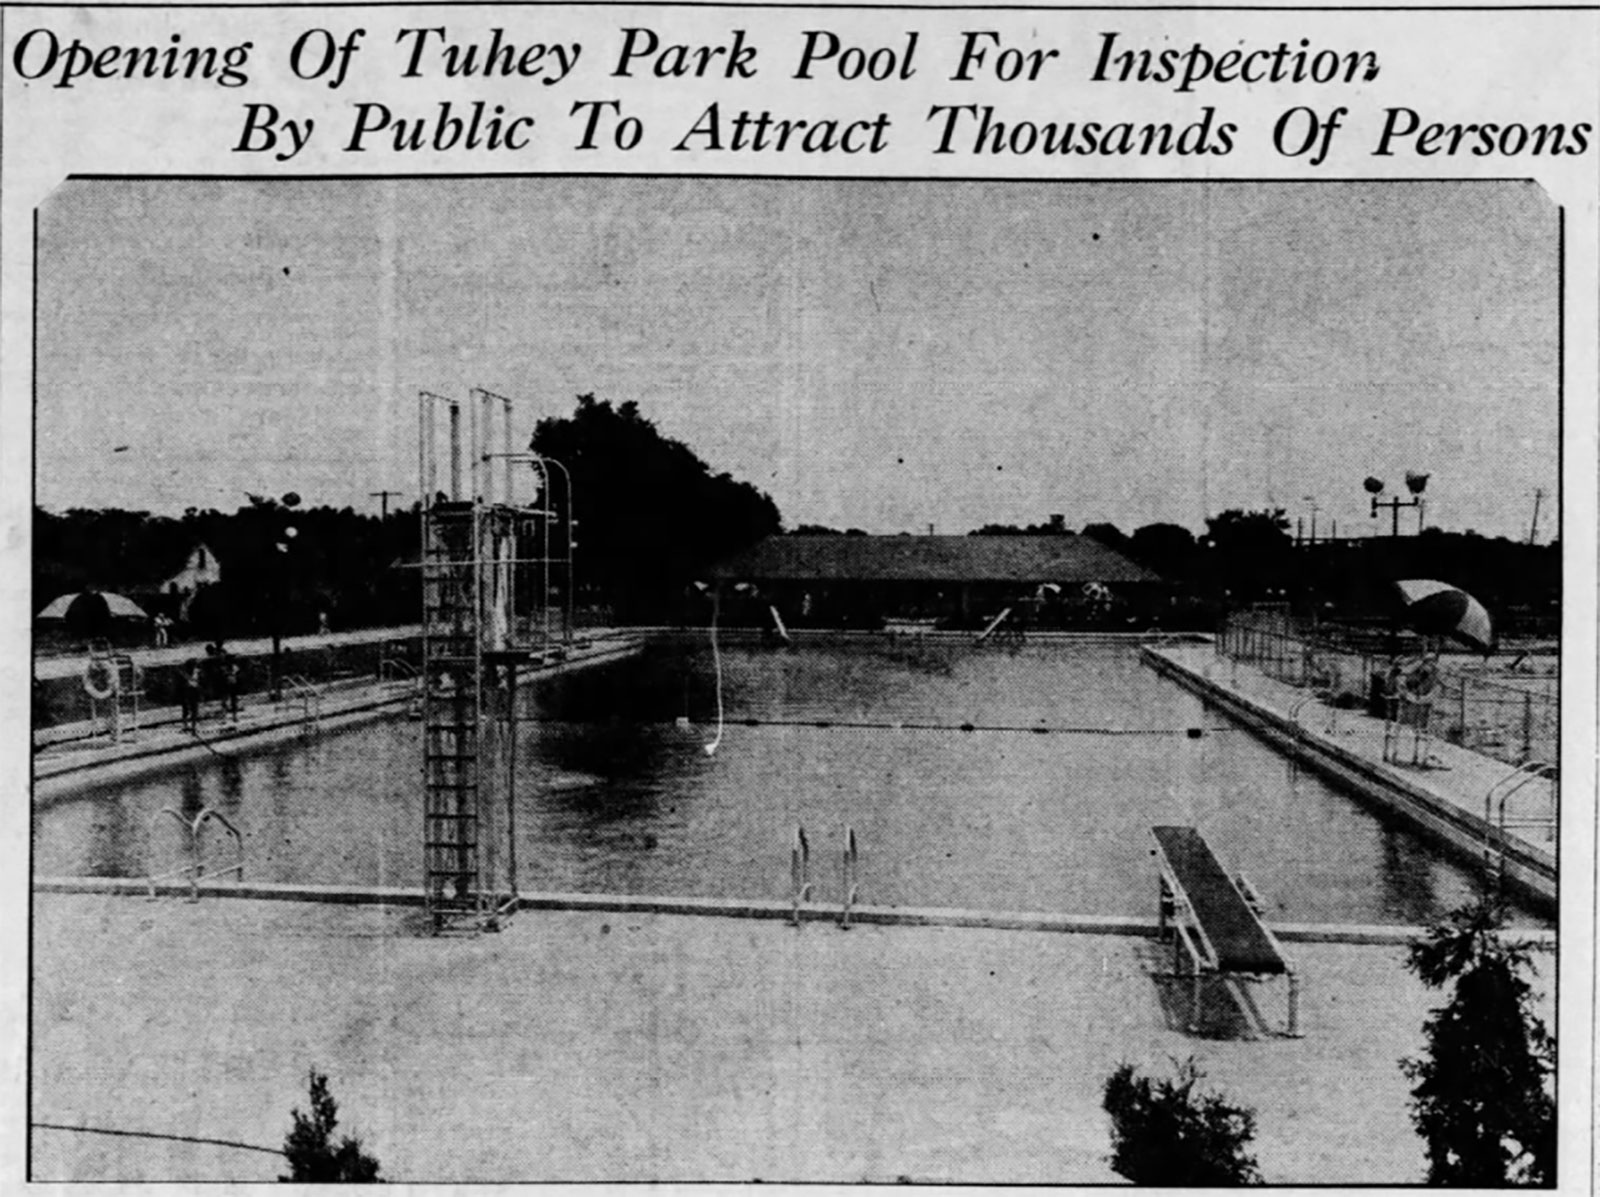 Tuhey Pool Opening - Image from the Muncie Sunday Star, July 15, 1934